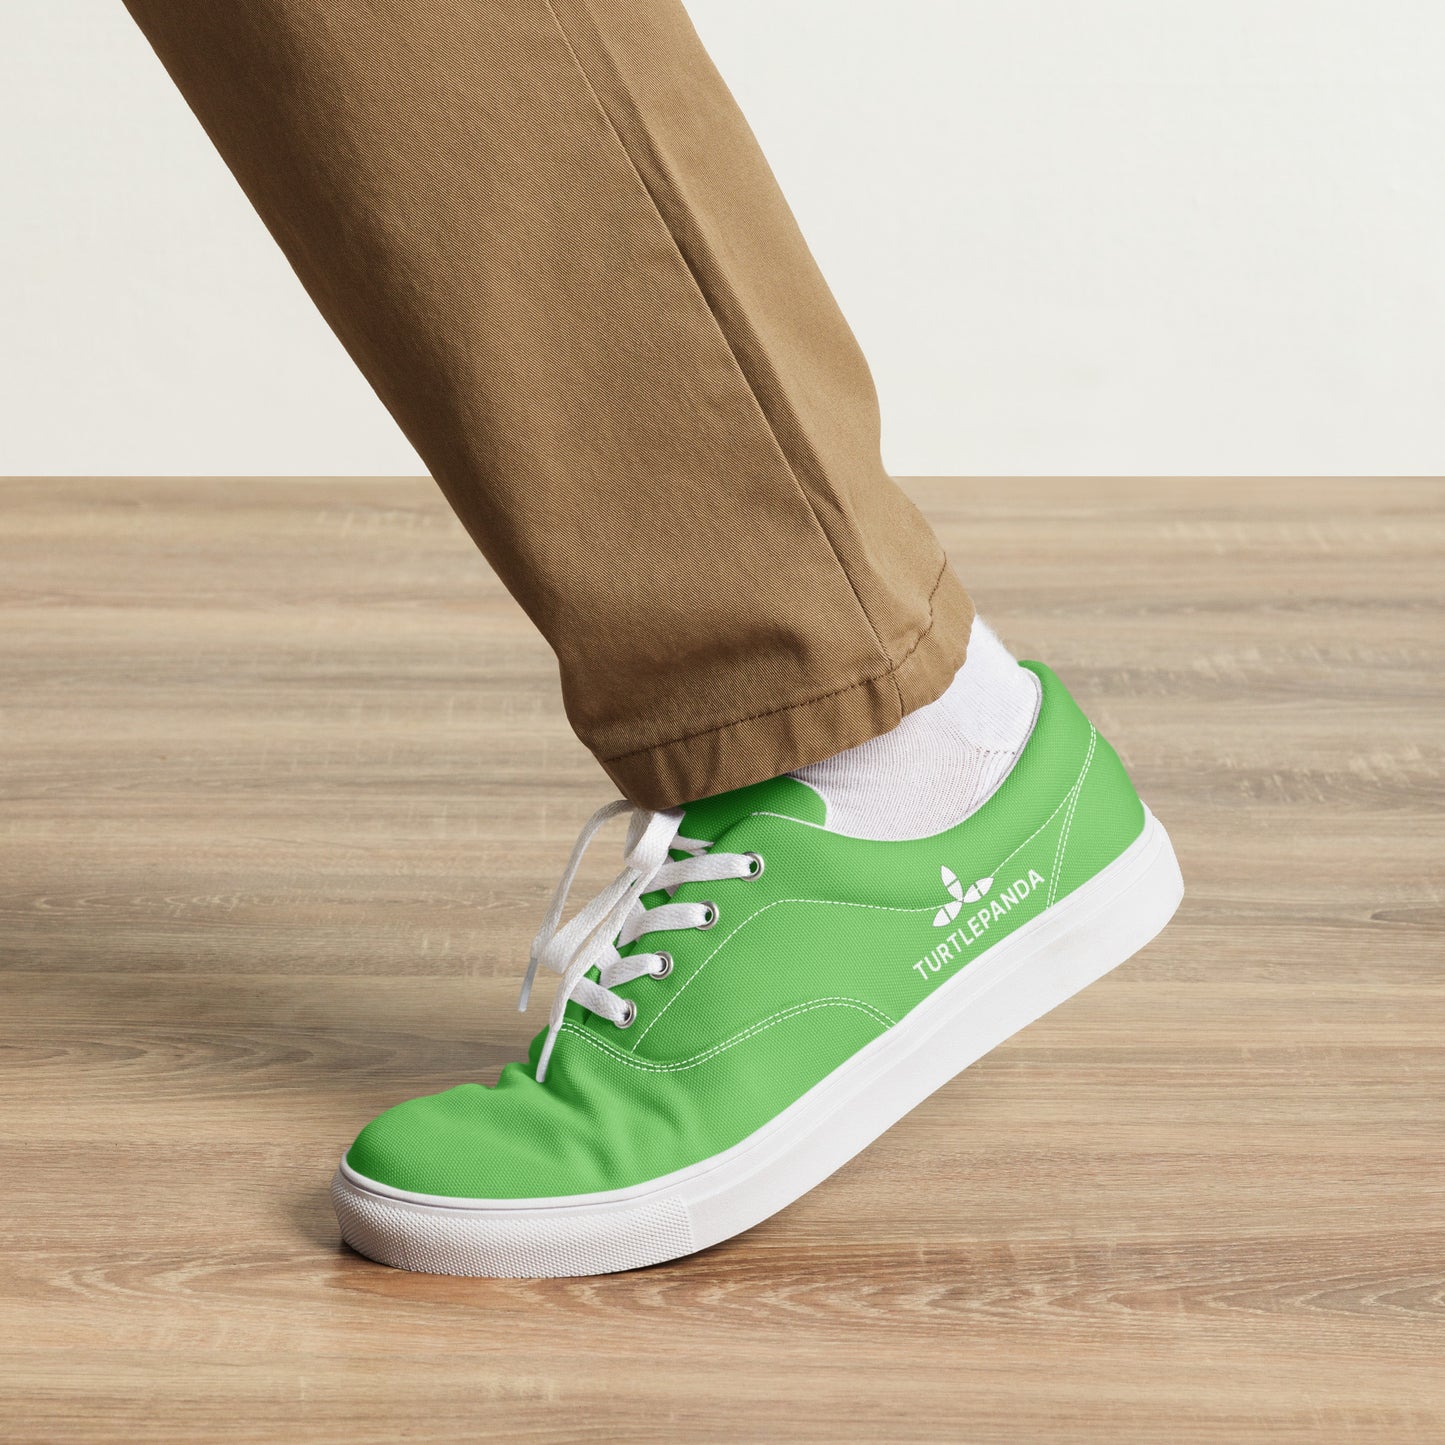 green sneaker - shoes - green canvas